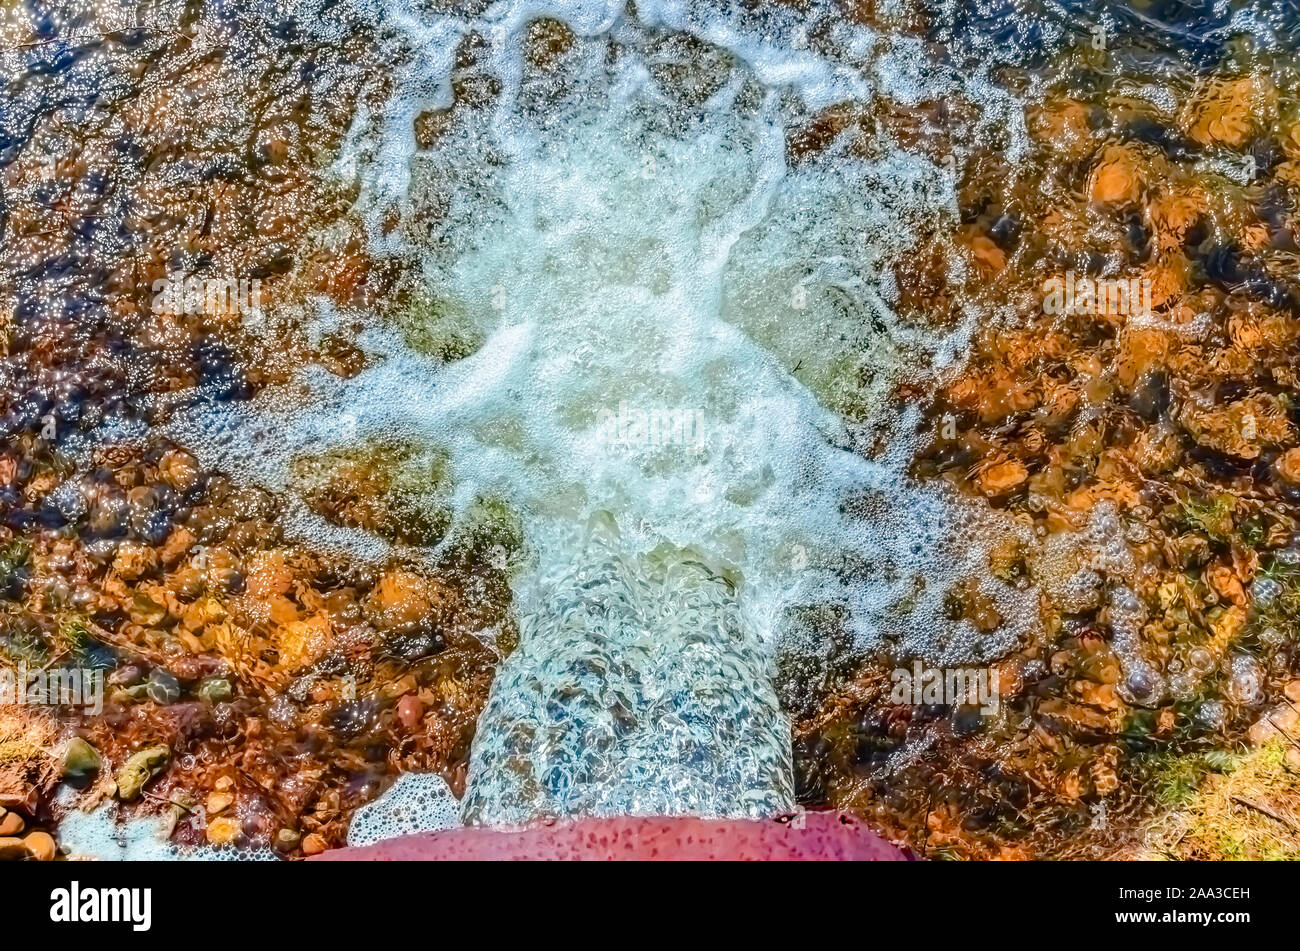 Water flowing out of a metal storm/drainage pipe. Stock Photo